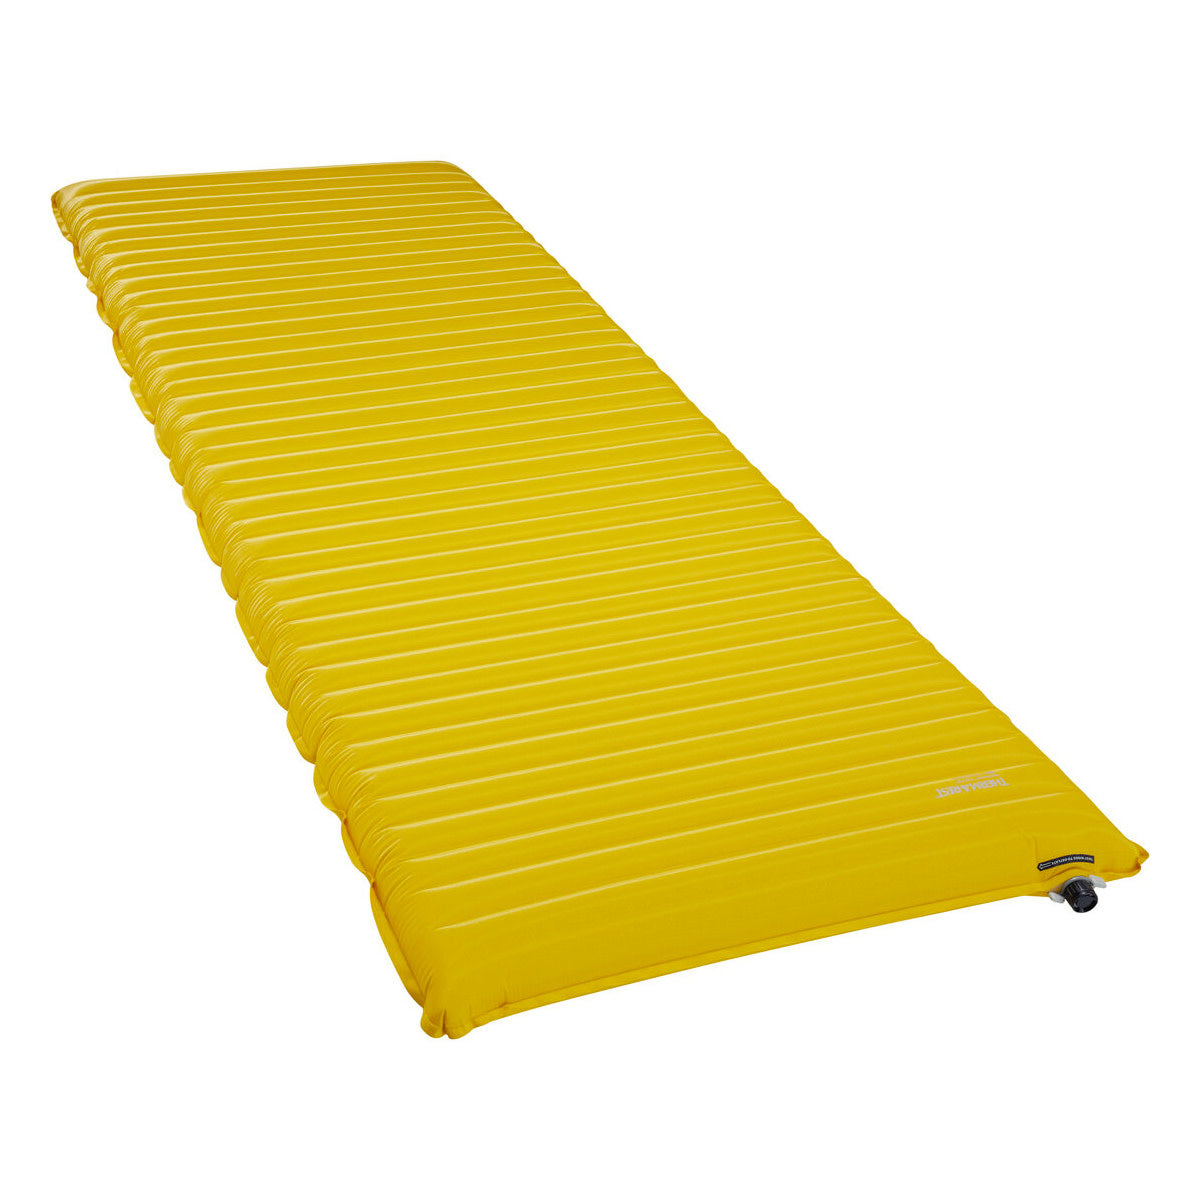 Therm-a-Rest - NeoAir® XLite™ NXT MAX Sleeping Pad - Large